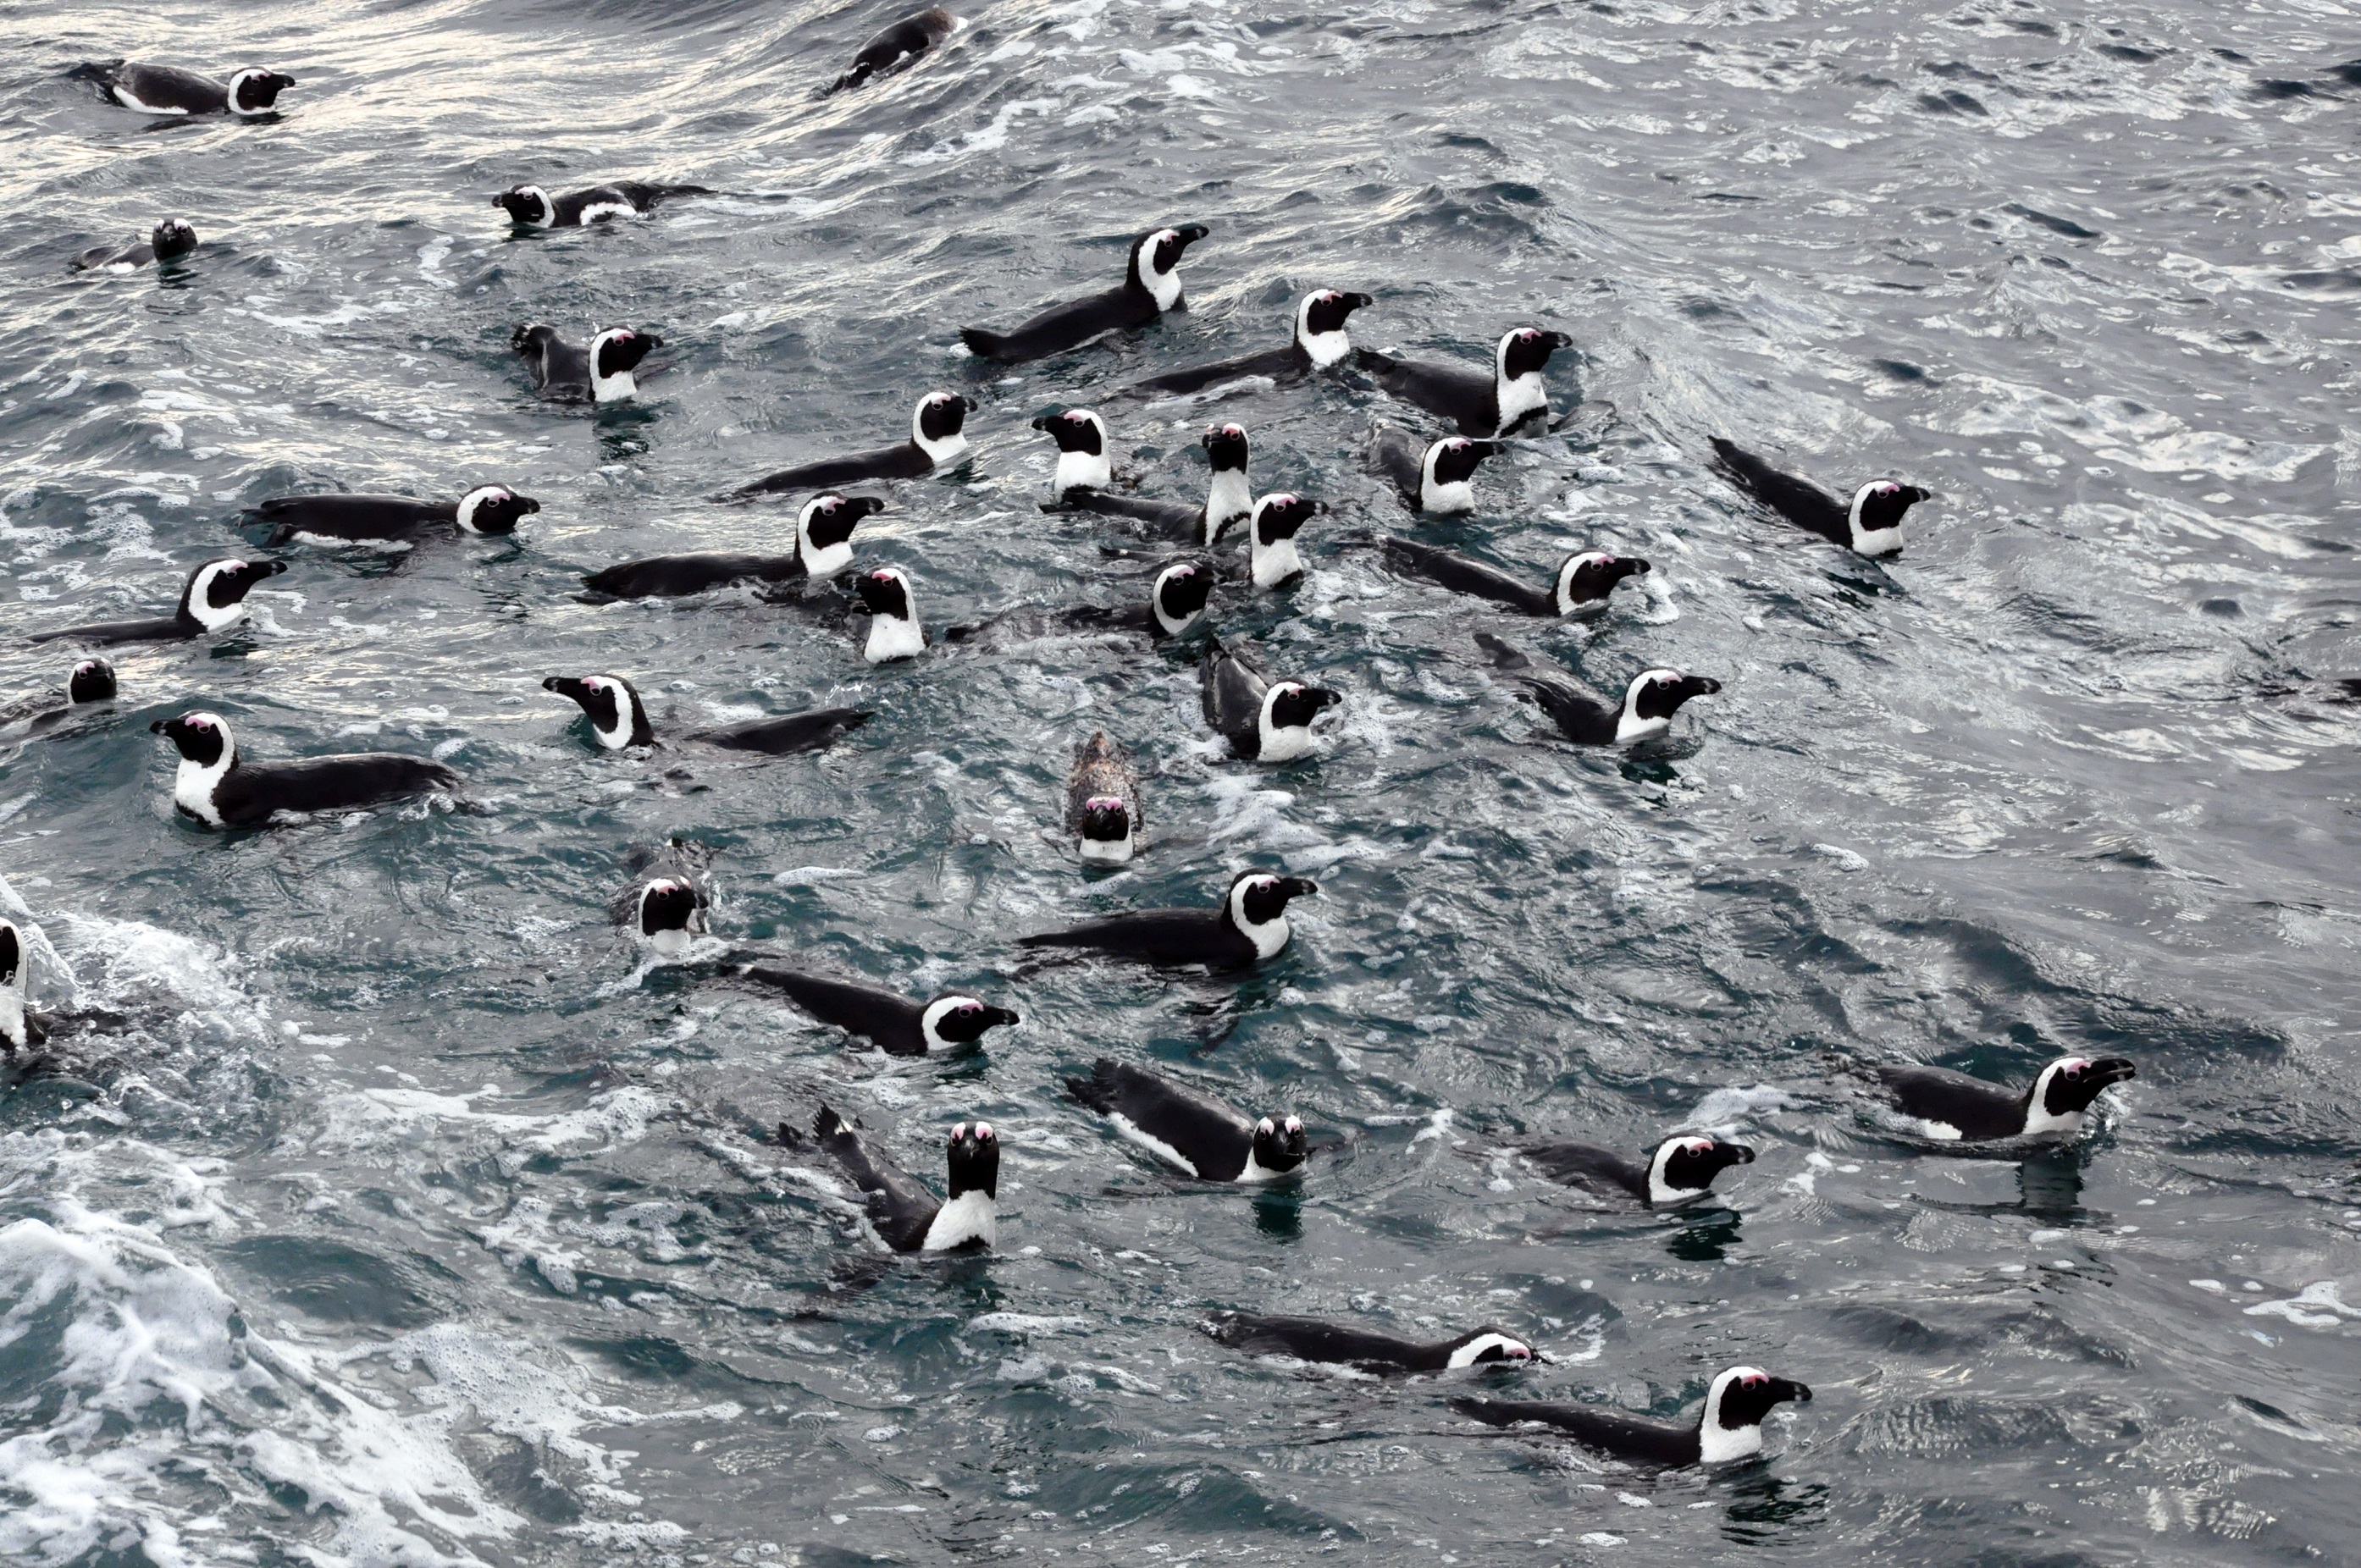 Colonies of African penguins could benefit from the introduction of a no-fishing zones, a study suggests (Richard Sherley/University of Exeter/PA).